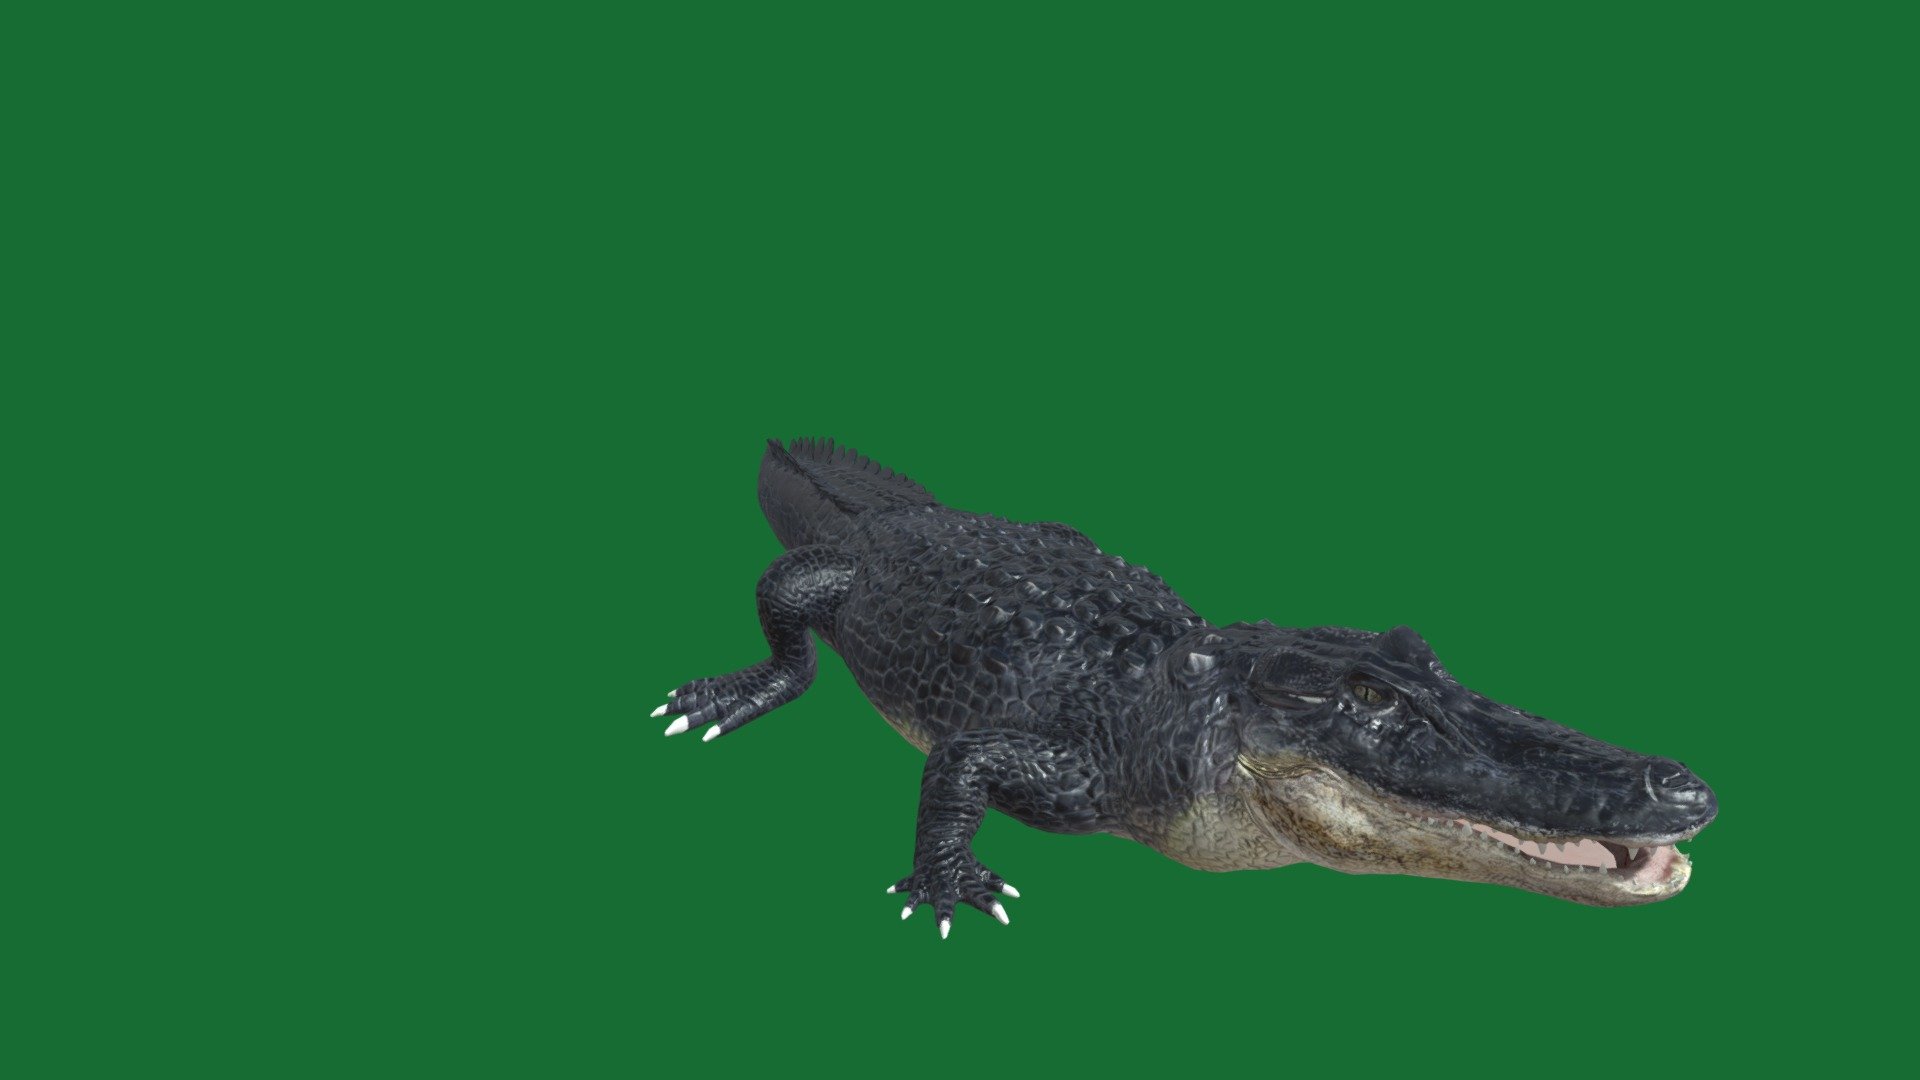 Alligator animals -  model repaired (animation did not work / bones / mesh ) repaired with model editor.

if original glb model did not work in Blender ?   pls use blender 29.0/1 .                   will not work for glb file in blender 3.0 and above .

An alligator is a crocodilian in the genus Alligator of the family Alligatoridae. The two extant species are the American alligator and the Chinese alligator. Additionally, several extinct species of alligator are known from fossil remains. 
Speed: 20 mph (Maximum, In The Water)
Lifespan: American alligator: 30 – 50 years
Grouping: congregation dictionary.com
Class: Reptilia
Family: Alligatoridae
Order: Crocodilia - Alligator 🐊 - 3D model by Nyilonelycompany 3d model